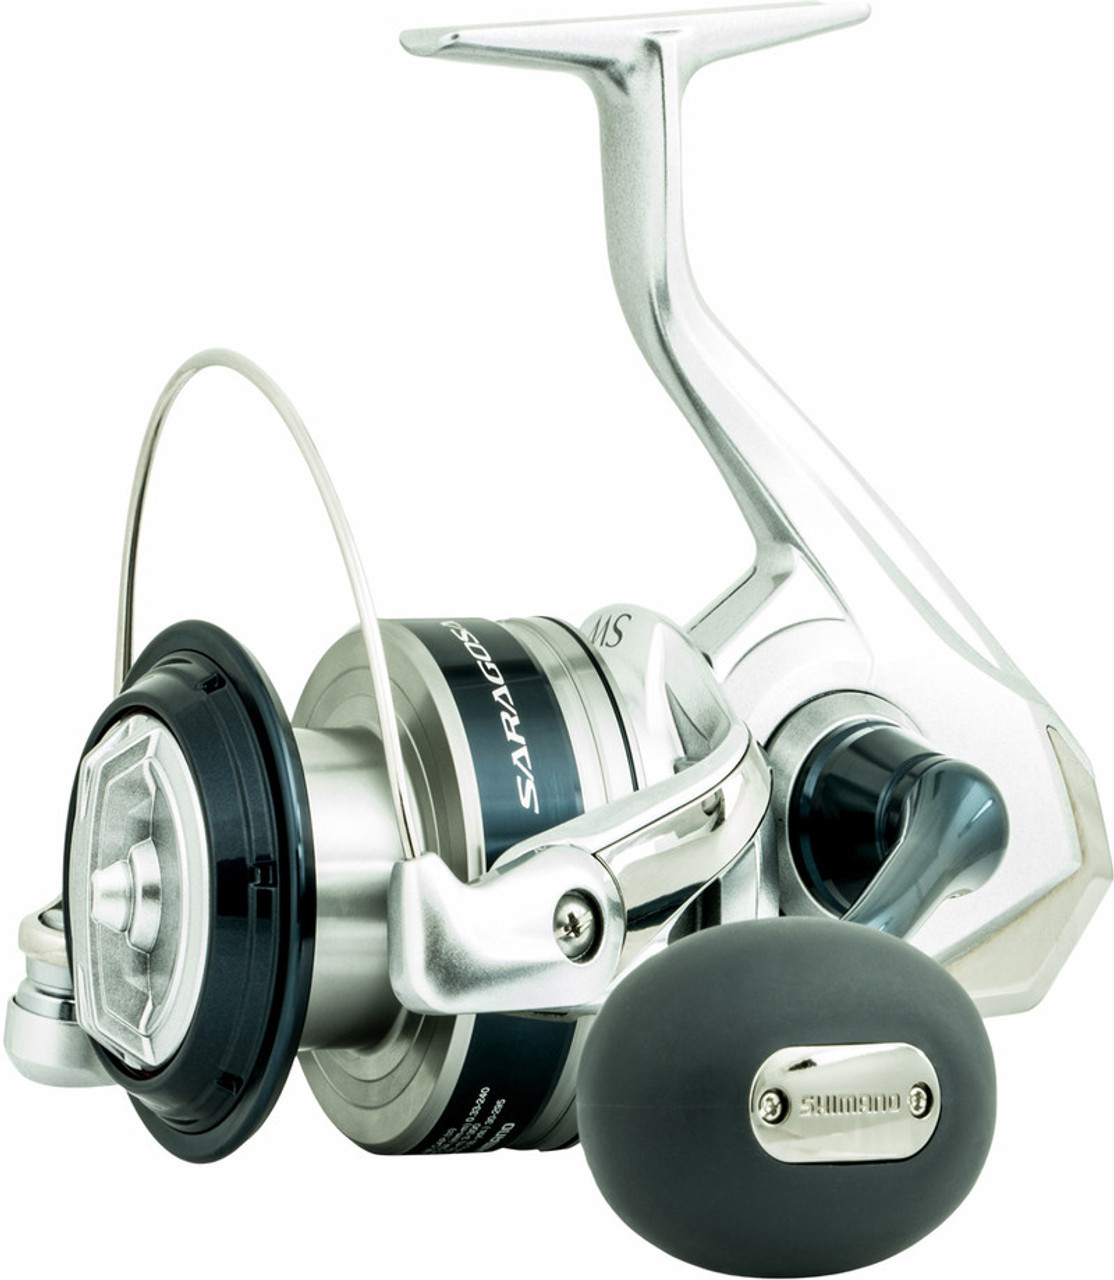 SARAGOSA SW A SPINNING REEL